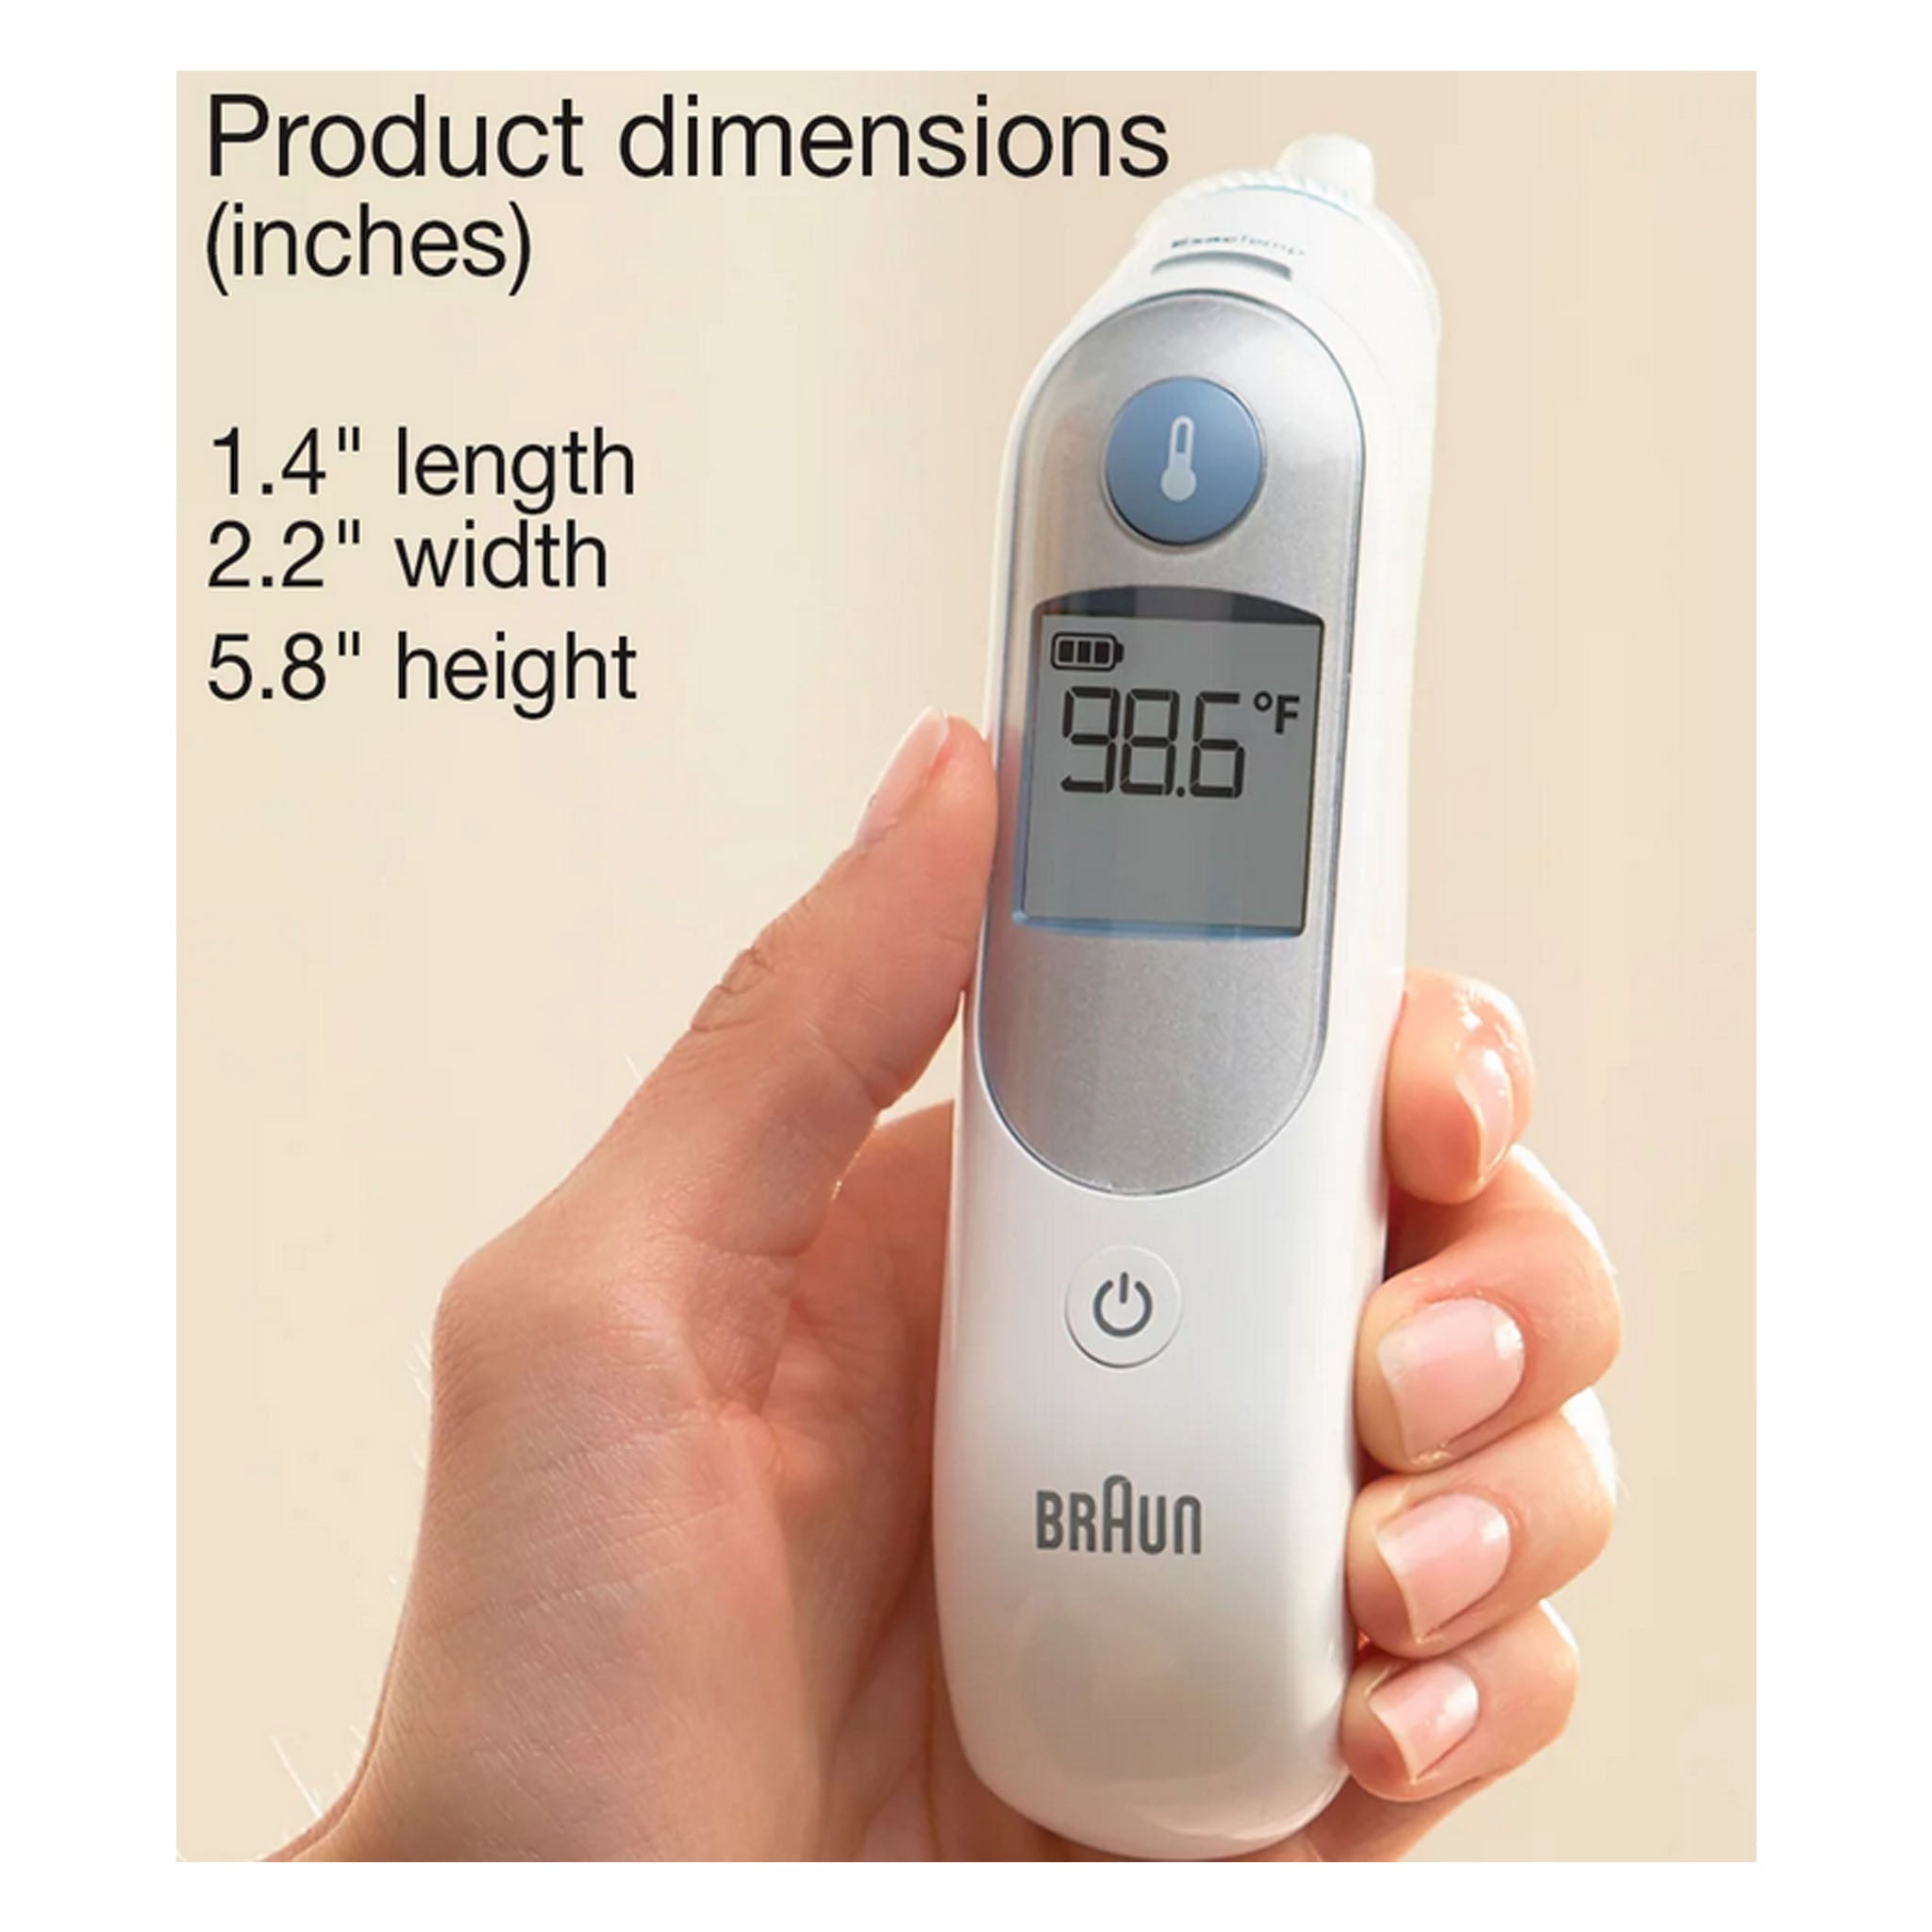 Braun ThermoScan Ear Thermometer with ExacTemp Technology